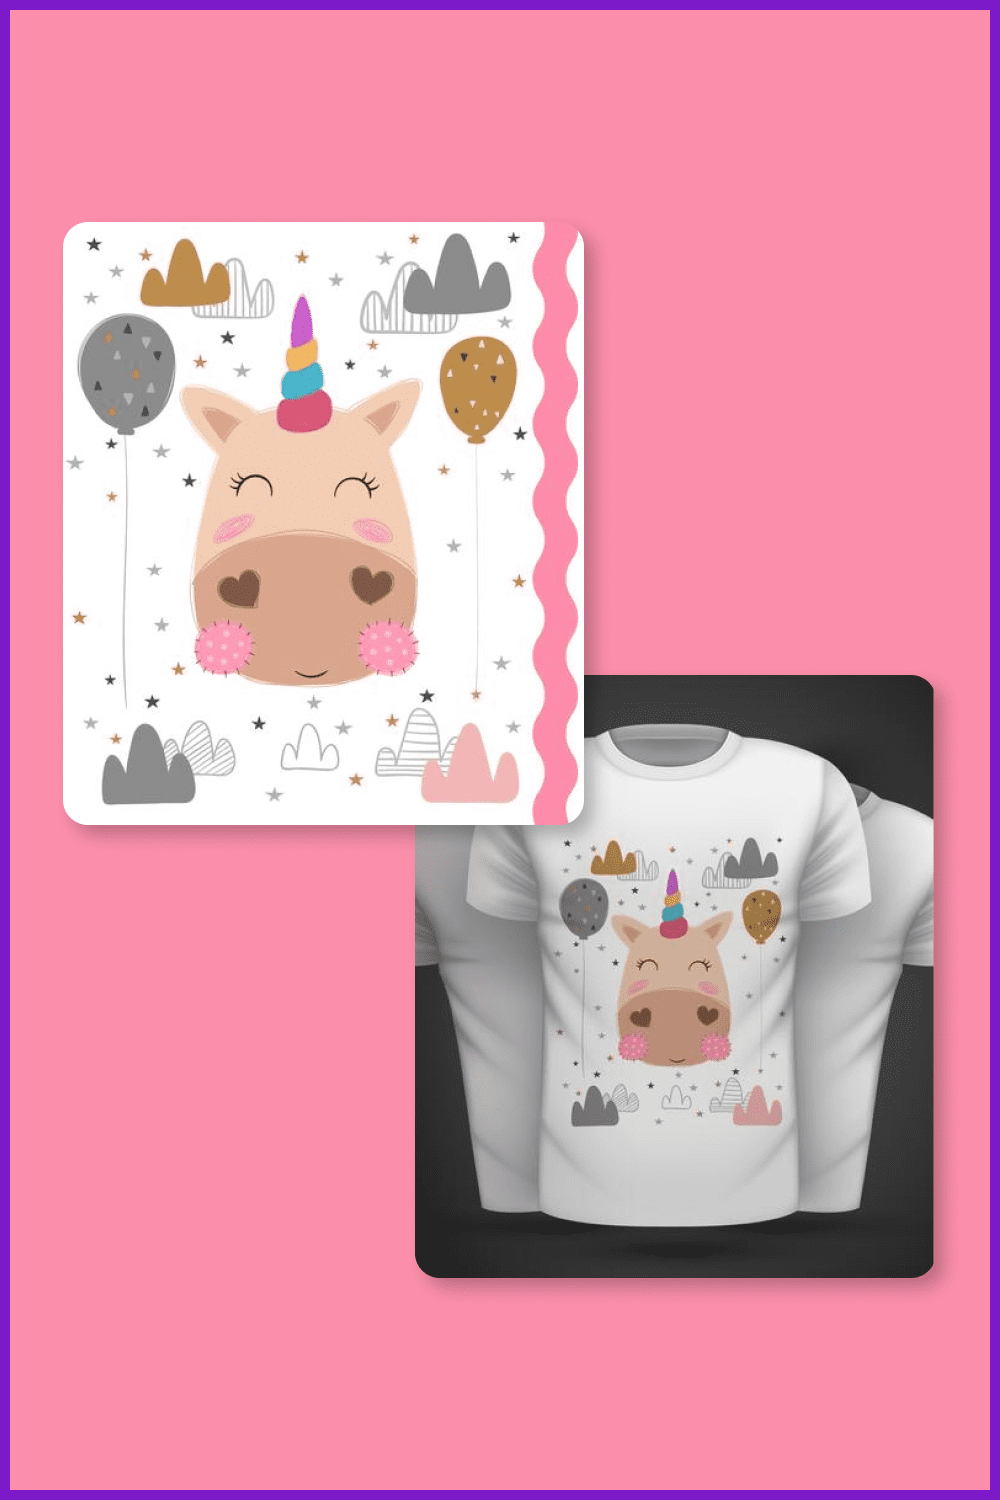 Cartoon cute unicorn with balloons and clouds on a t-shirt.